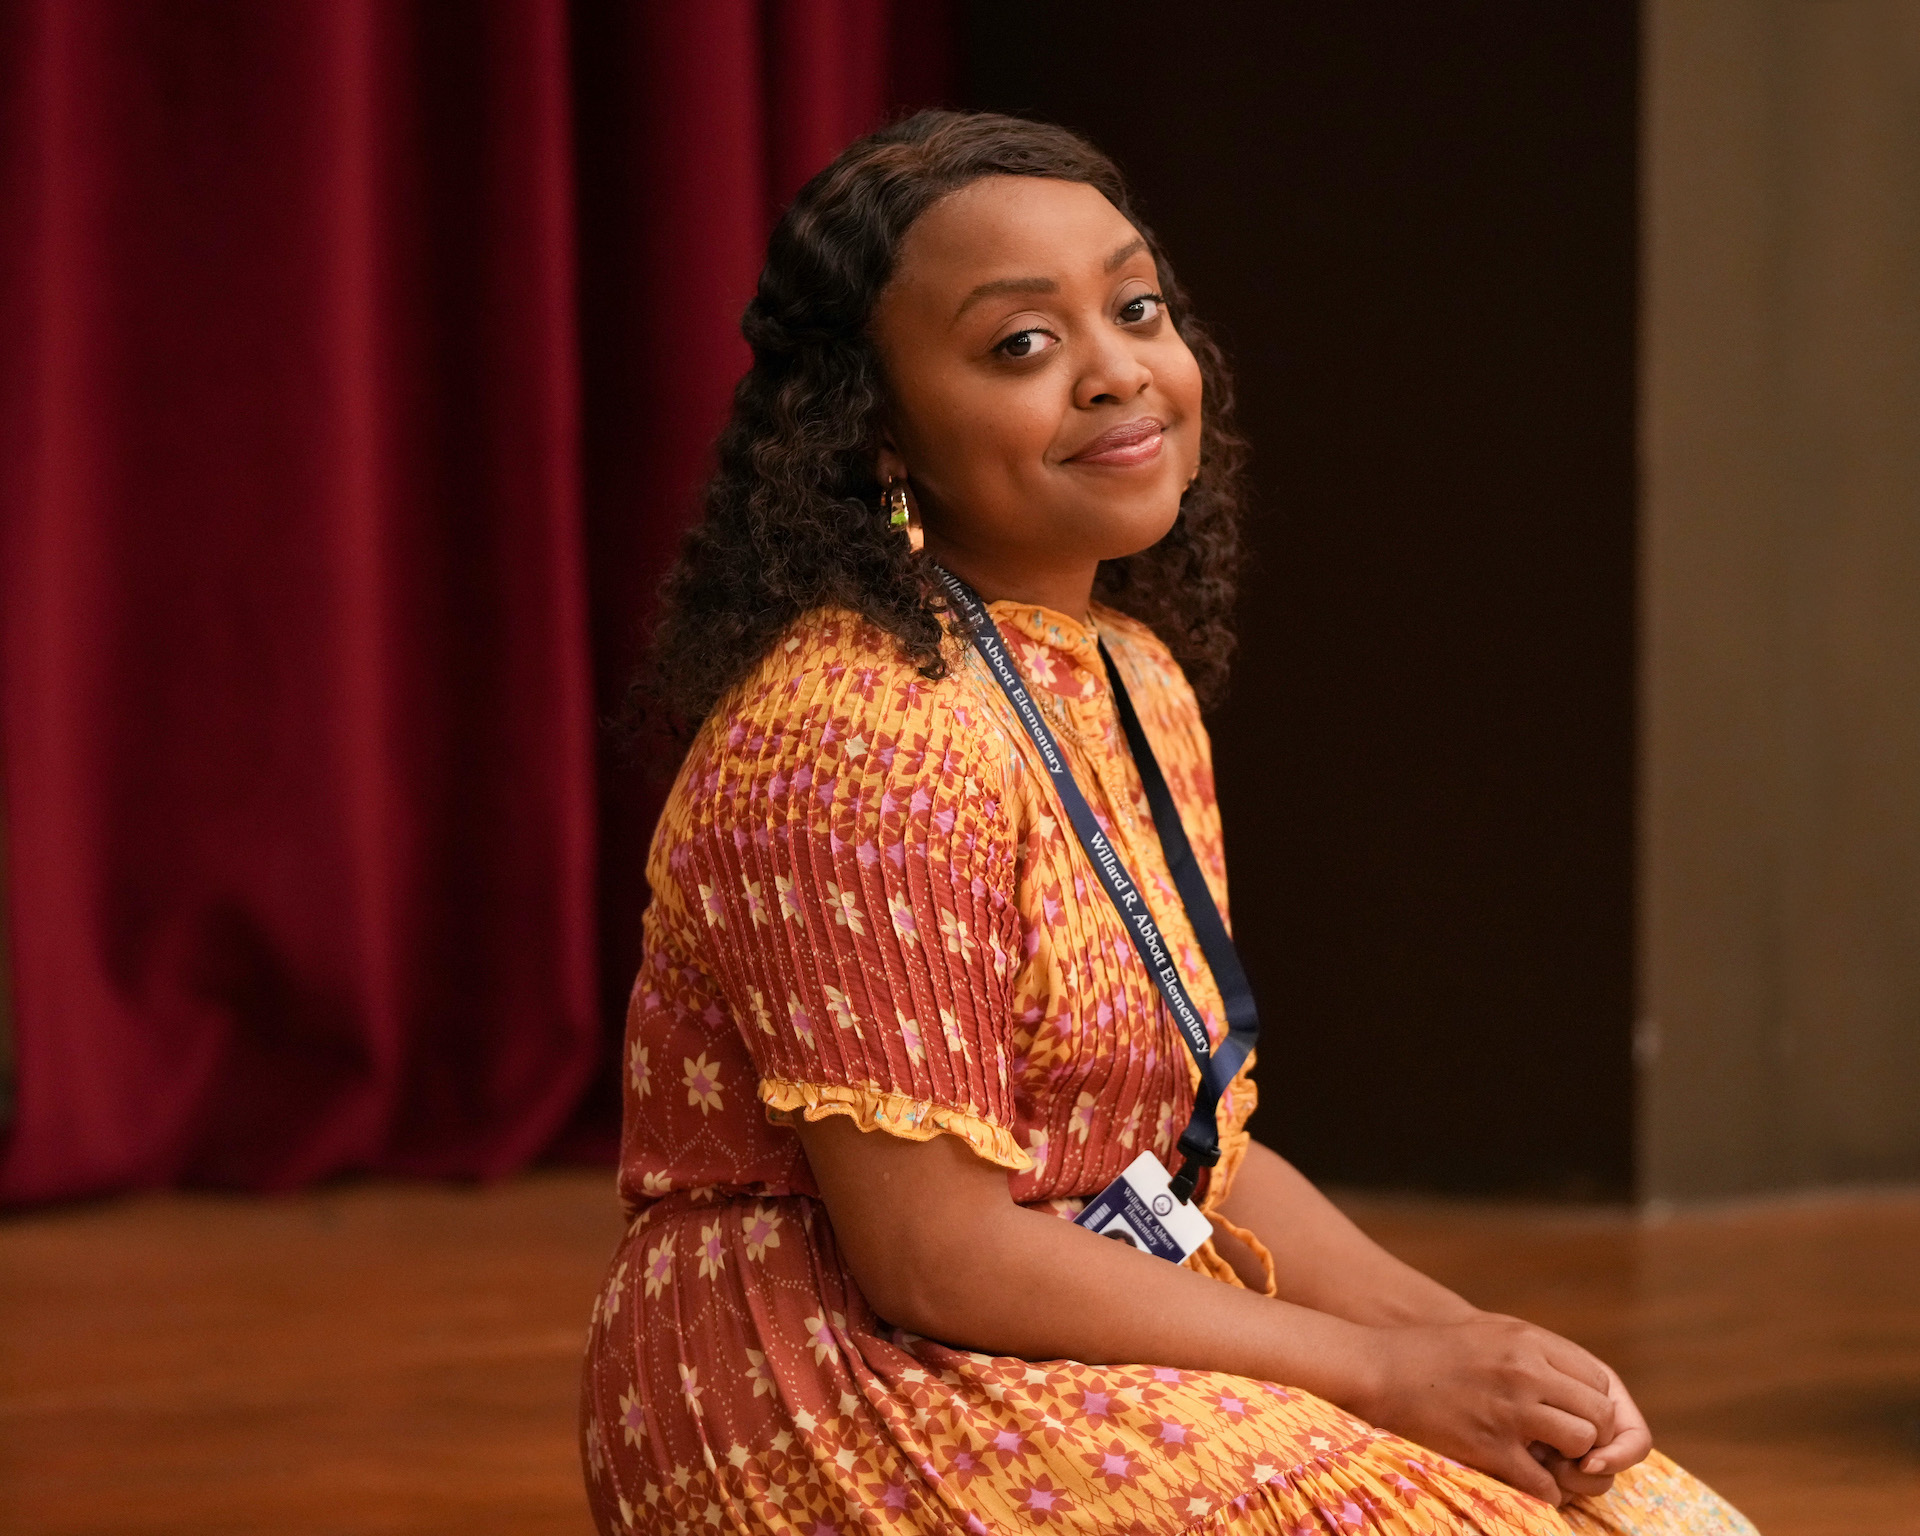 When Emmy nominations were announced on Tuesday, July 12, writer and actress Quinta Brunson made history as the first Black woman to be nominated for three Emmys in the comedy categories for her series Abbott Elementary. Still, many fans recognize her from her days on BuzzFeed. 